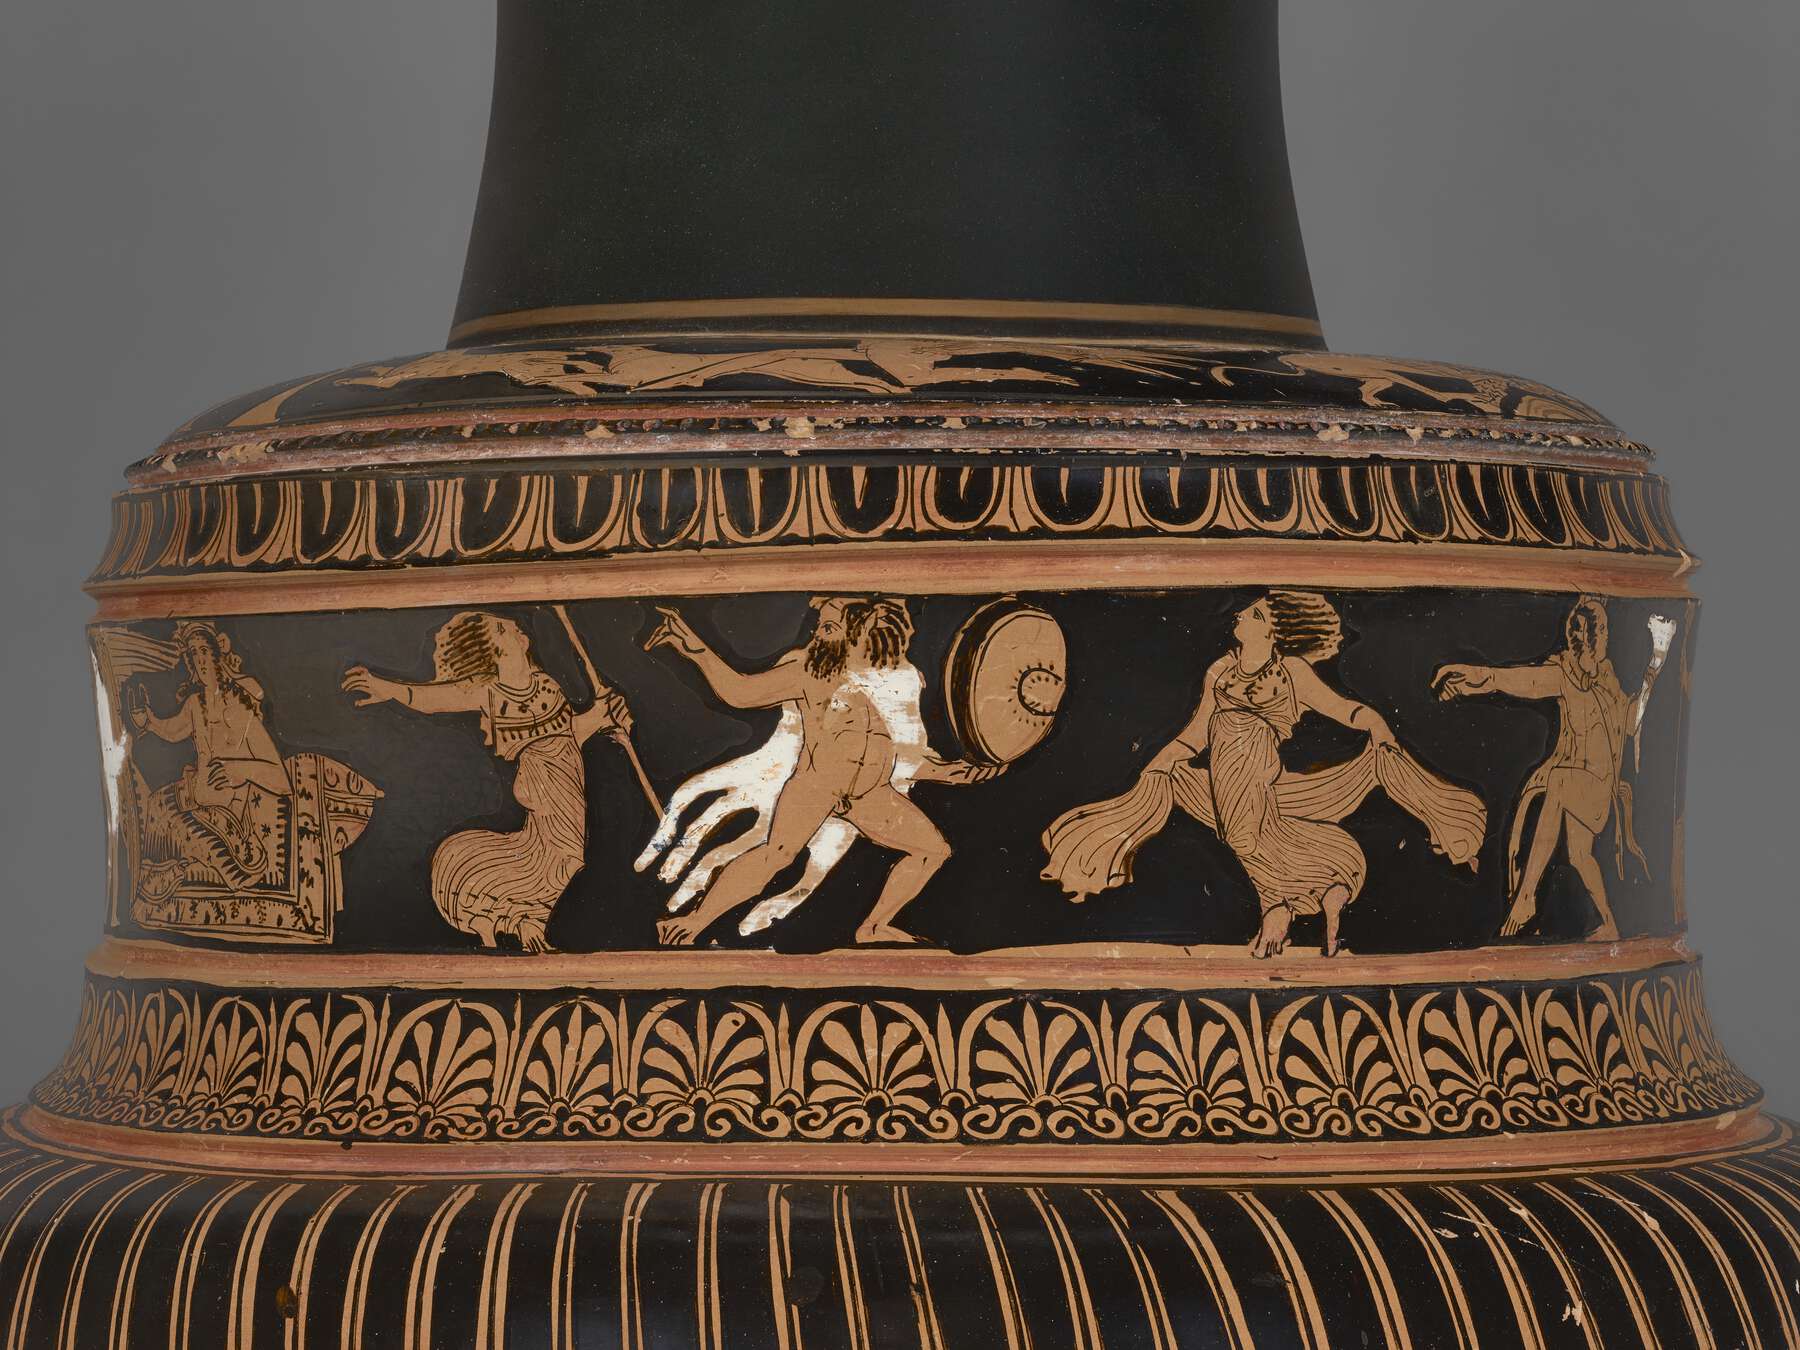 Smaller detail of the foot, with several people, the one in the middle draped in an animal skin and carrying a shield